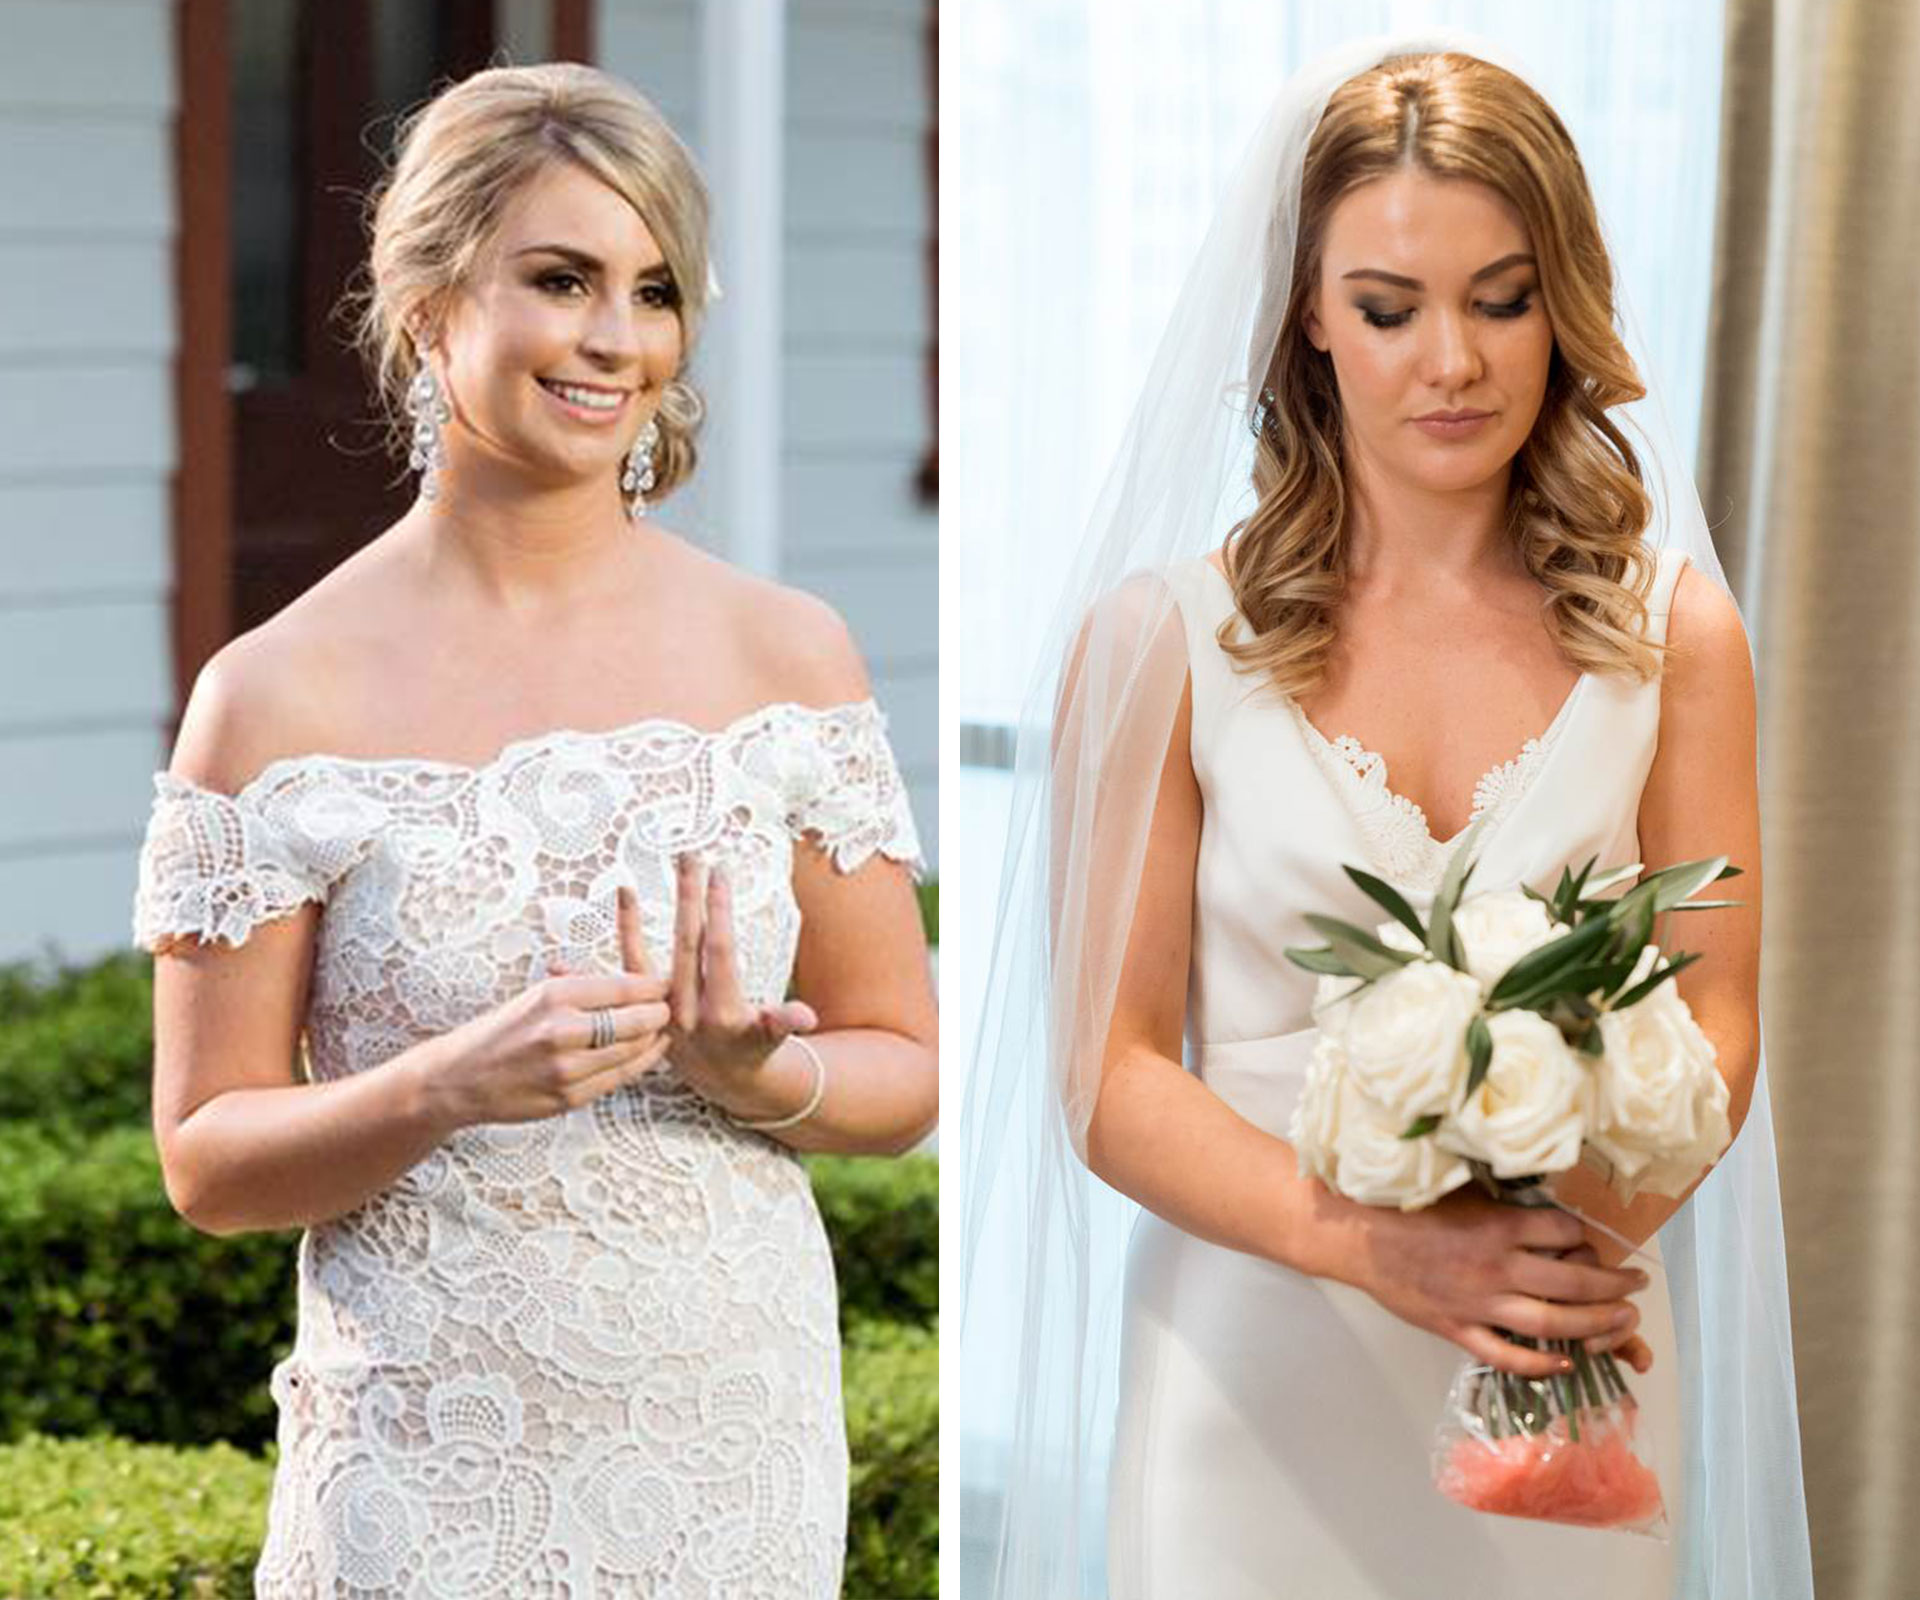 Married at First Sight NZ: We rate the wedding dresses